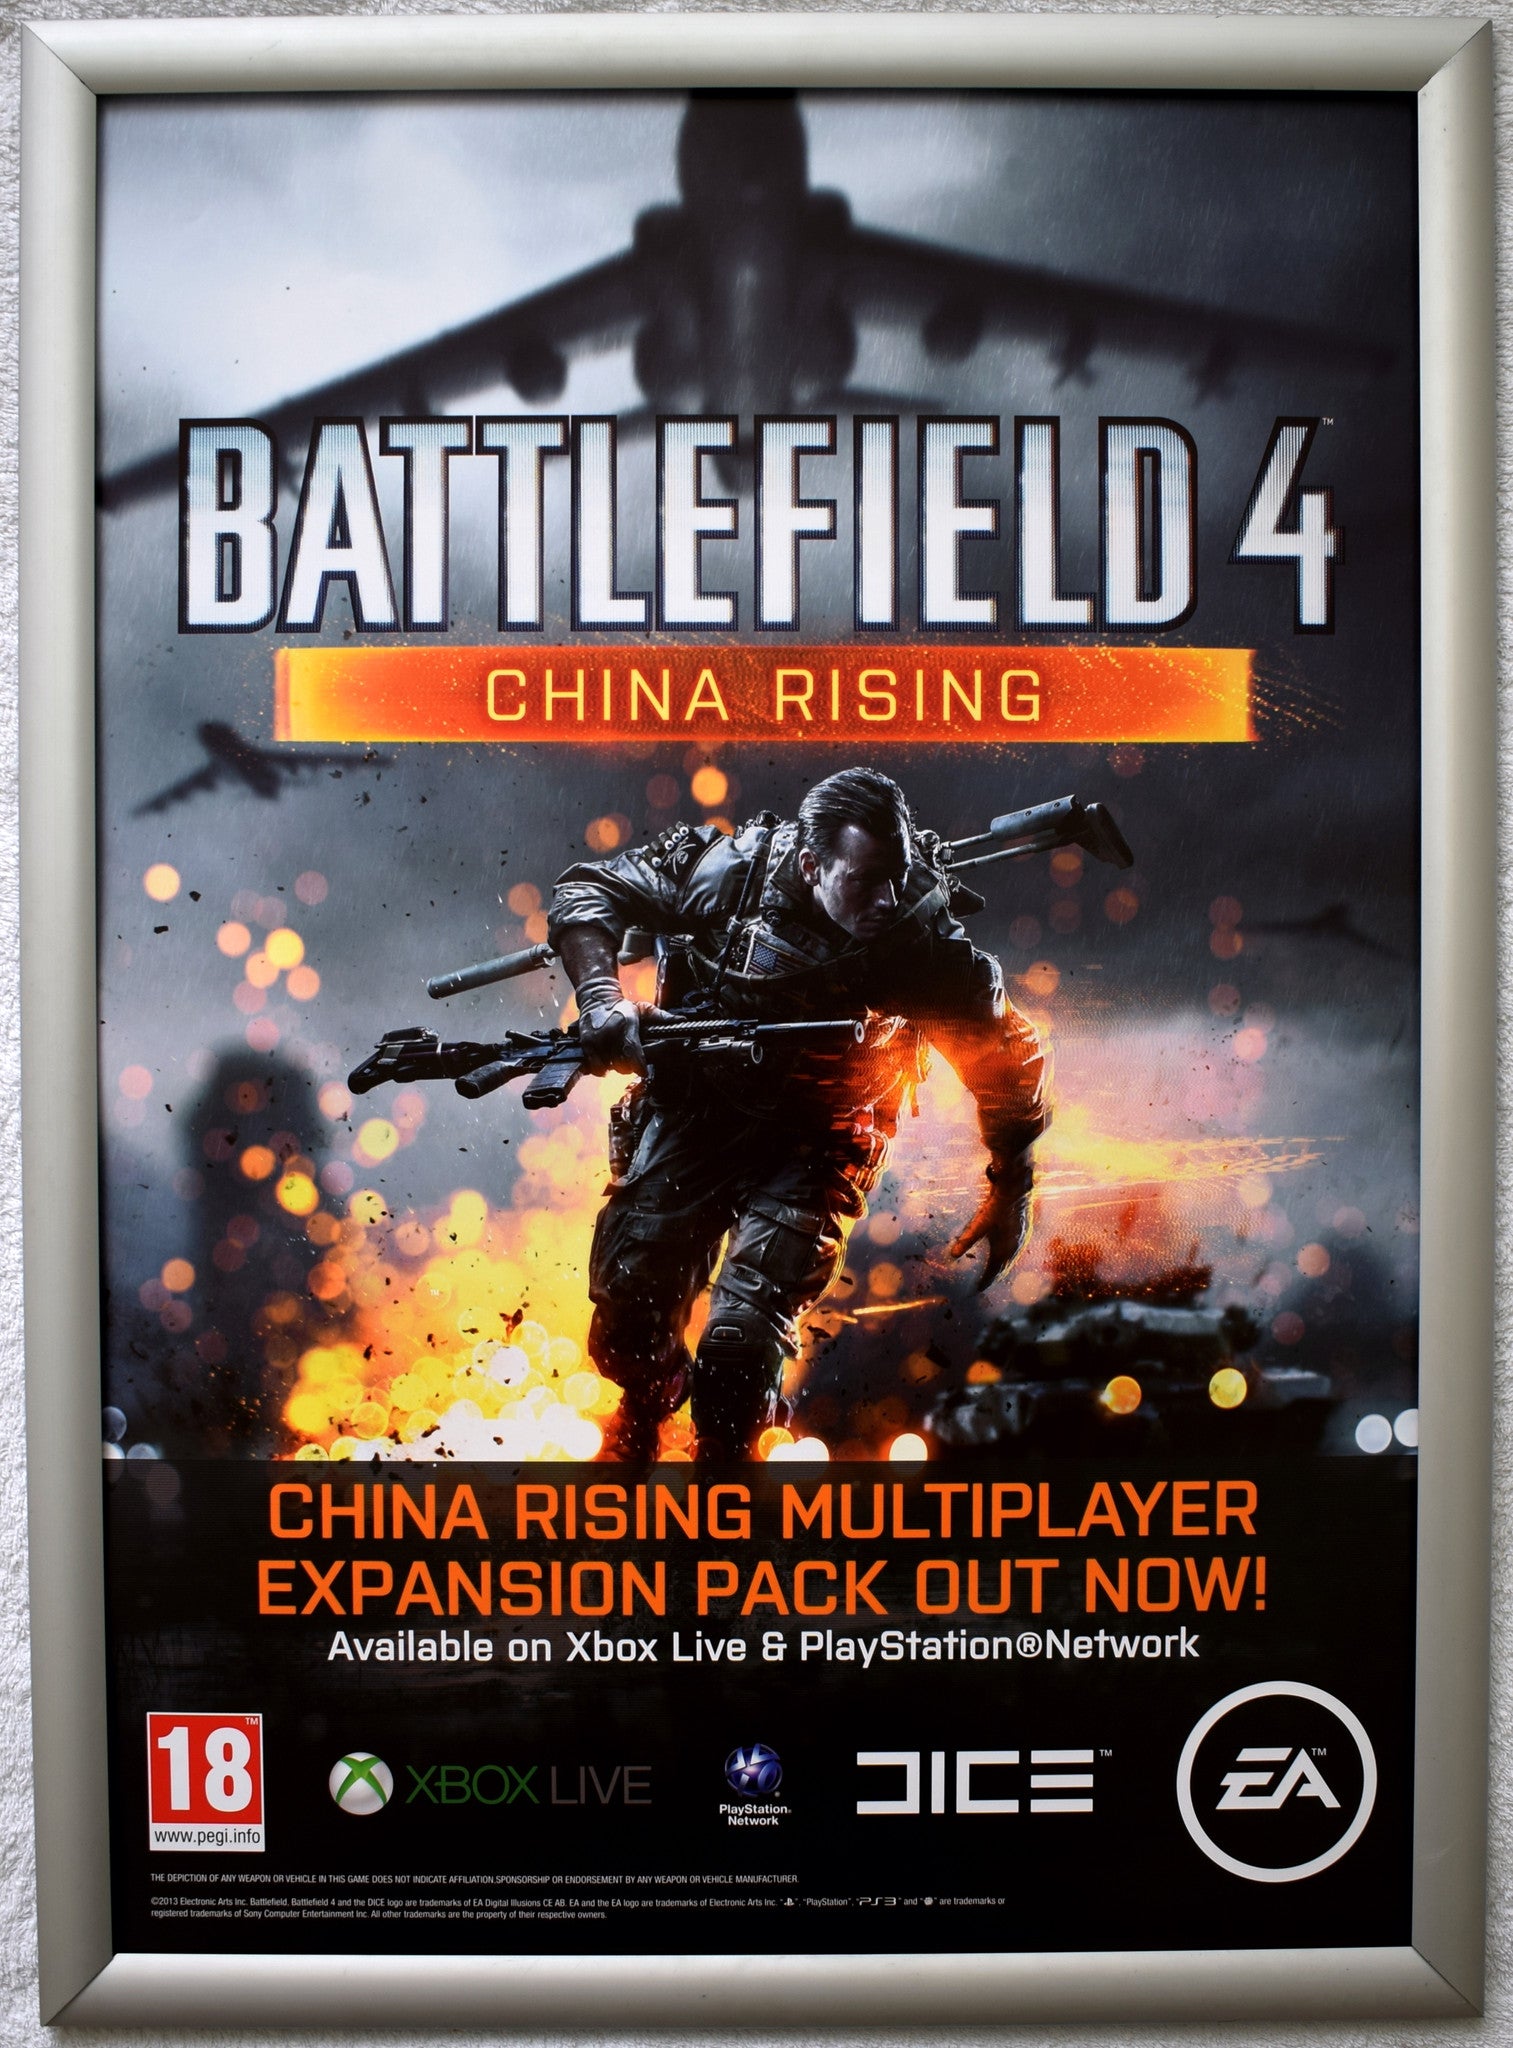 Battlefield 4 (A2) Promotional Poster Set of 4